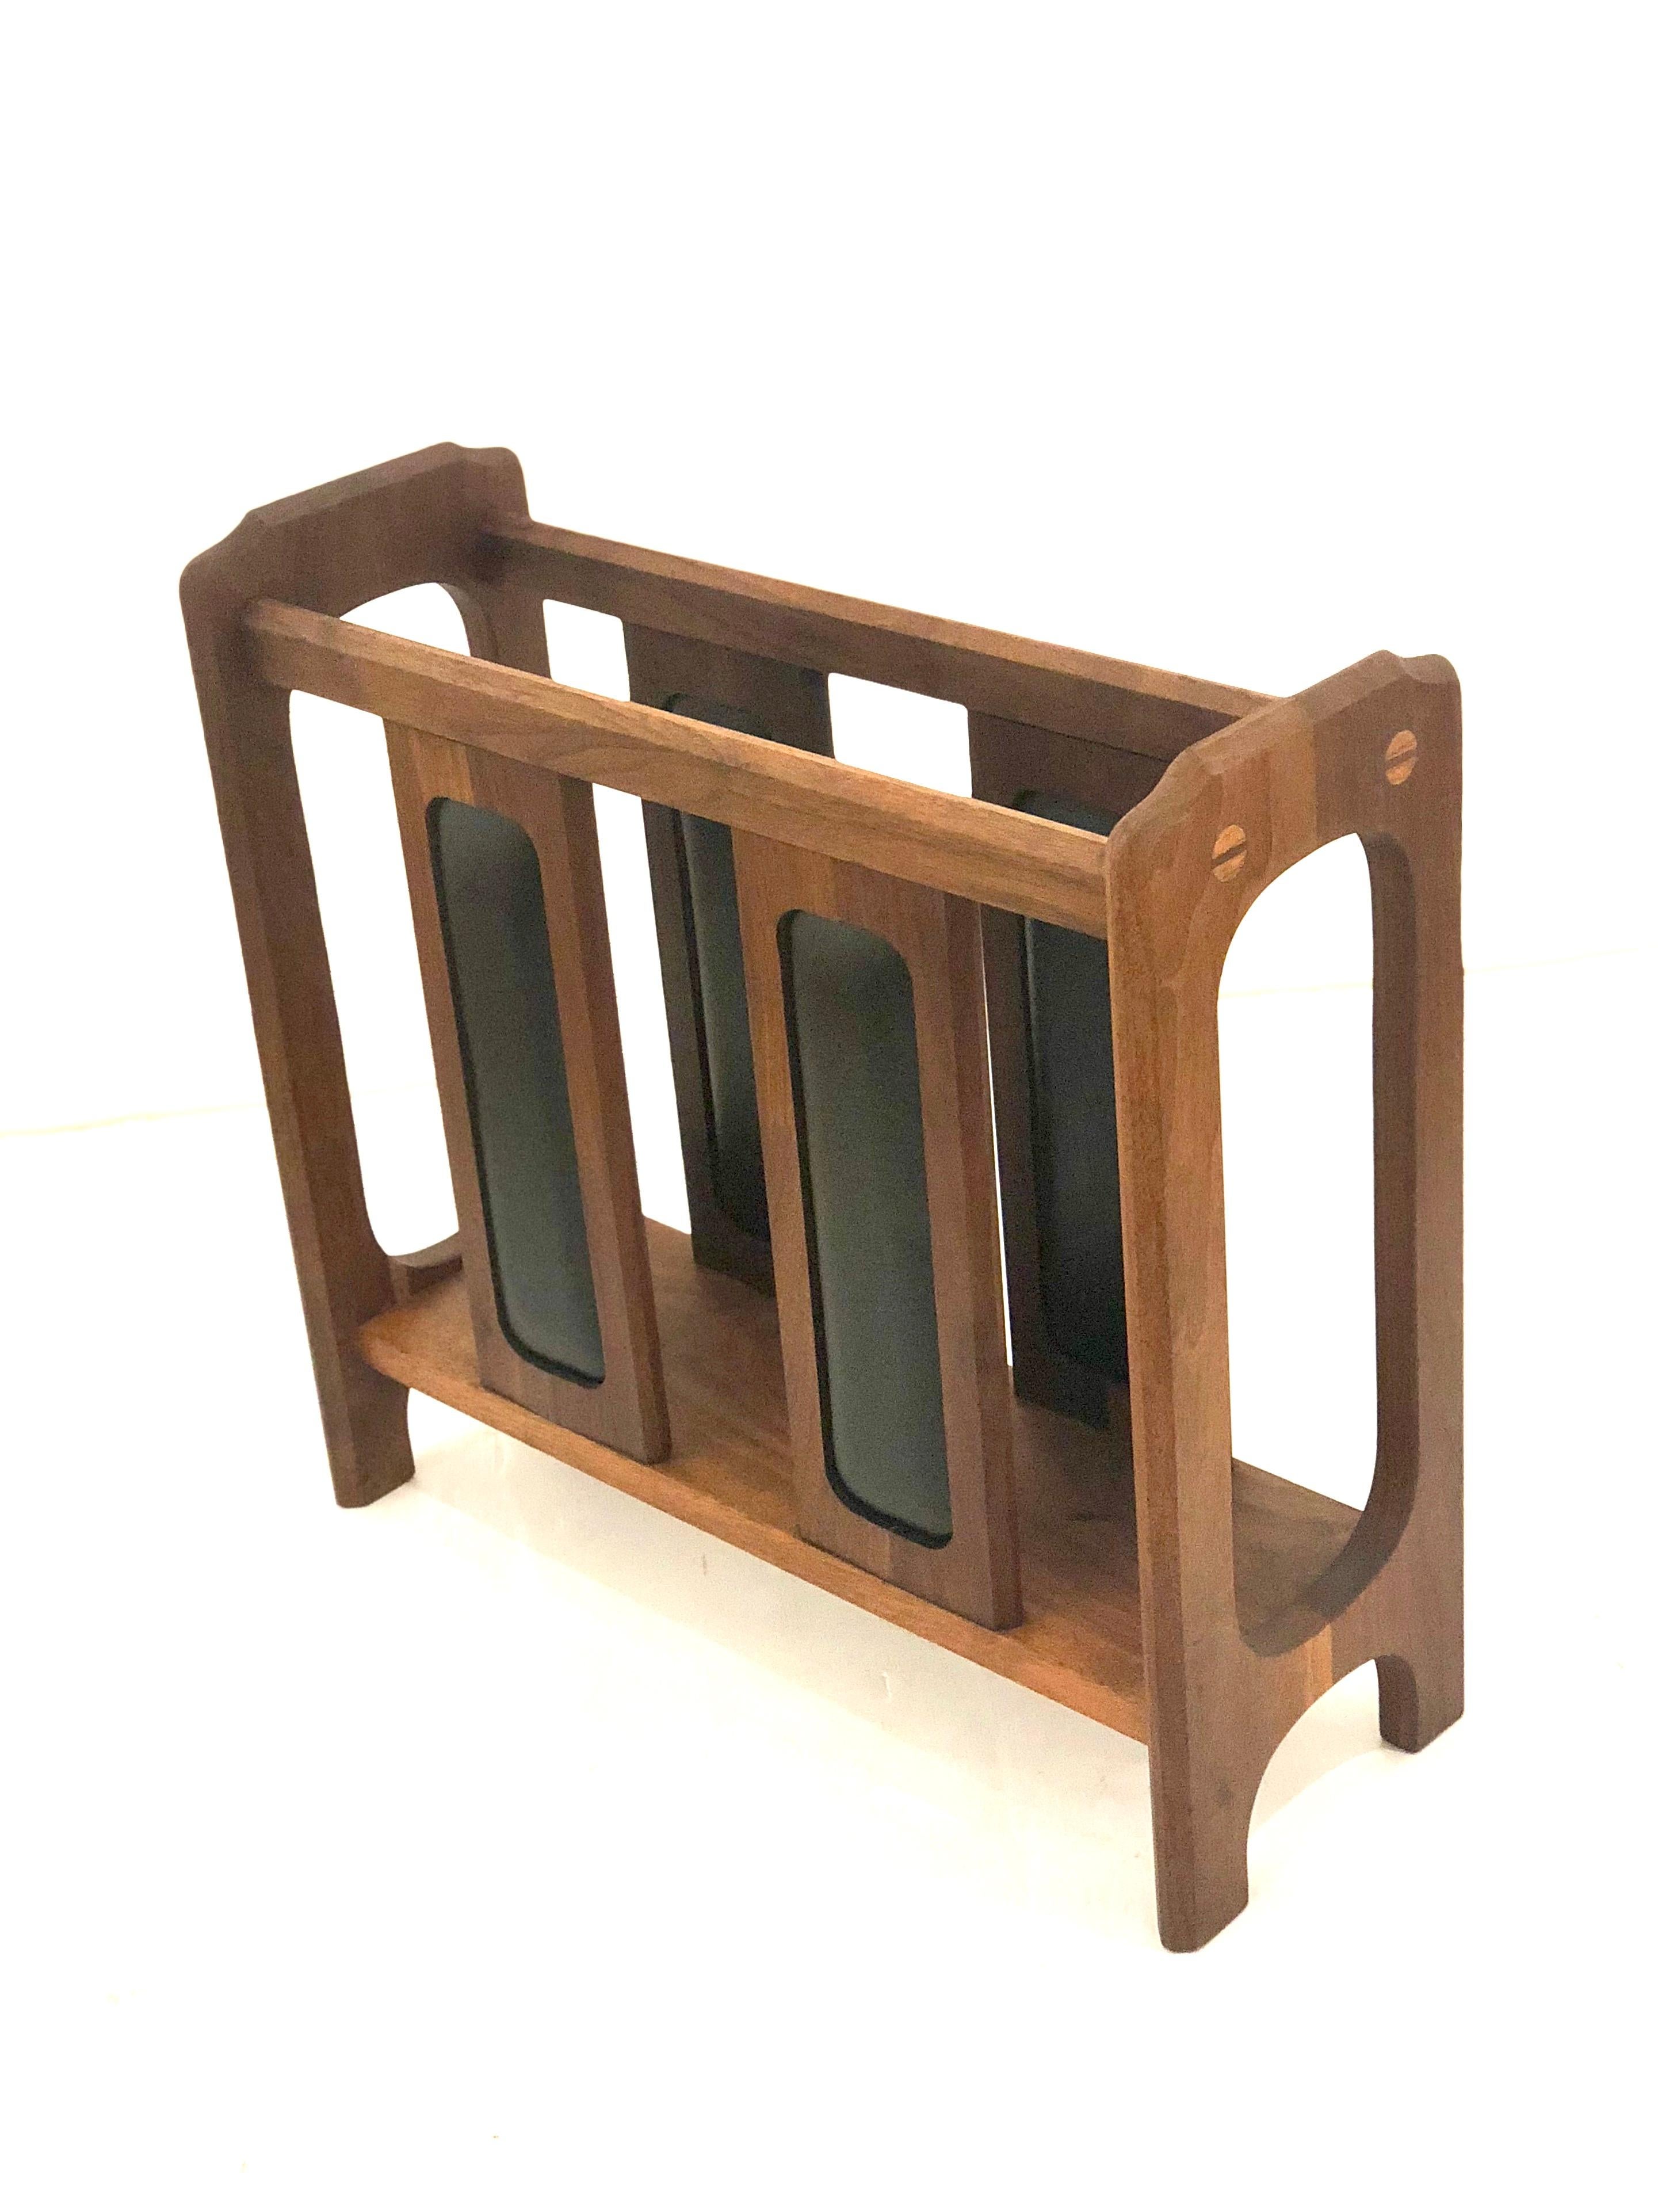 Beautiful and rare solid walnut magazine rack, we believe it was design by Arthur Umanoff, freshly refinished, California design. Incredible craftsmanship and detail with black Naugahyde decorative inserts.